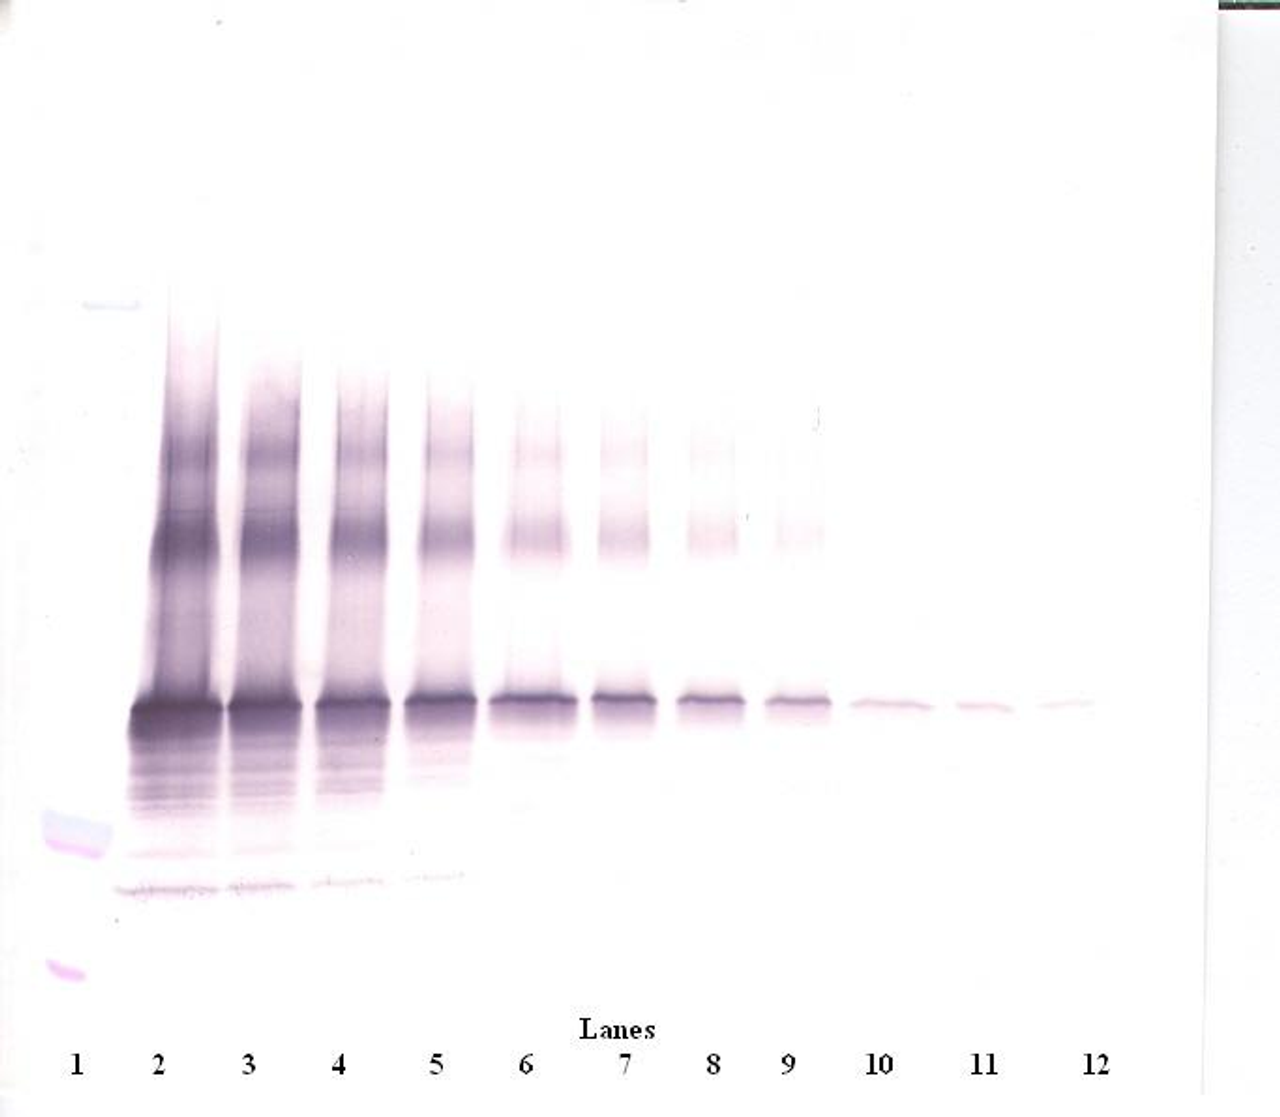 To detect hNOV by Western Blot analysis this antibody can be used at a concentration of 0.1 - 0.2 ug/ml. Used in conjunction with compatible secondary reagents the detection limit for recombinant hNOV is 1.5 - 3.0 ng/lane, under either reducing or non-reducing conditions.